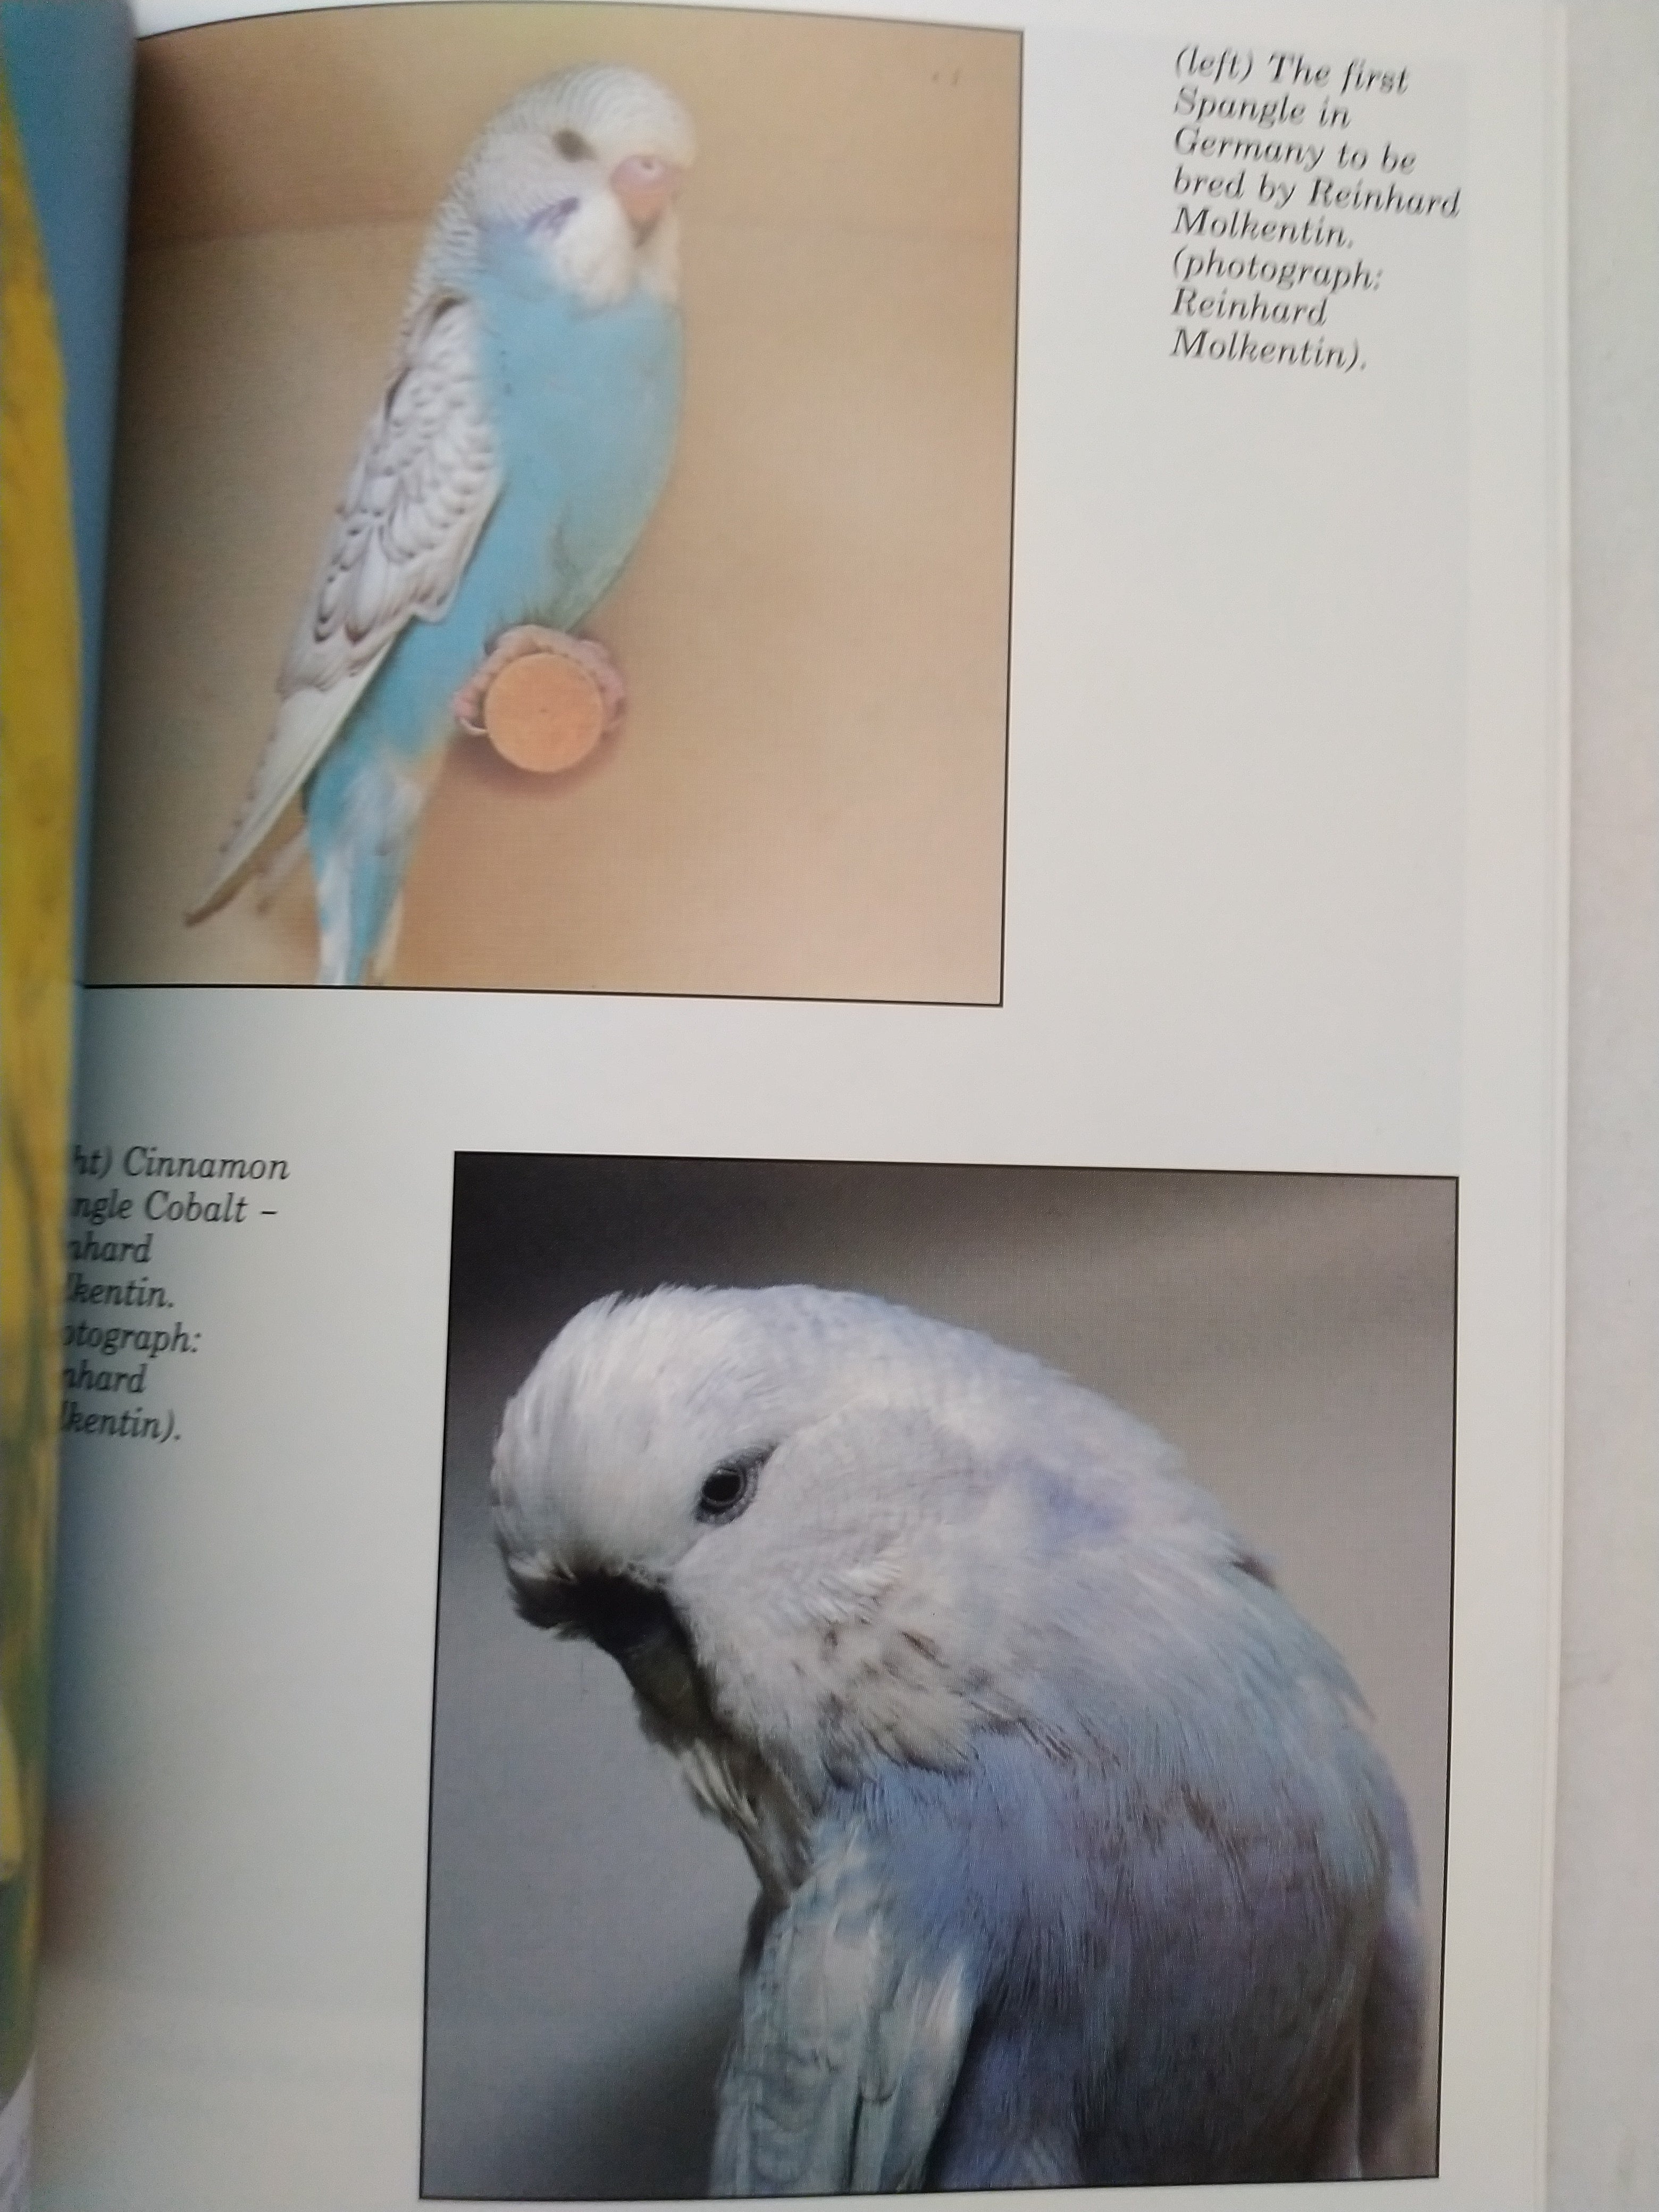 All About Spangle Budgerigars by Fred Wright and Roy Stringer (New)